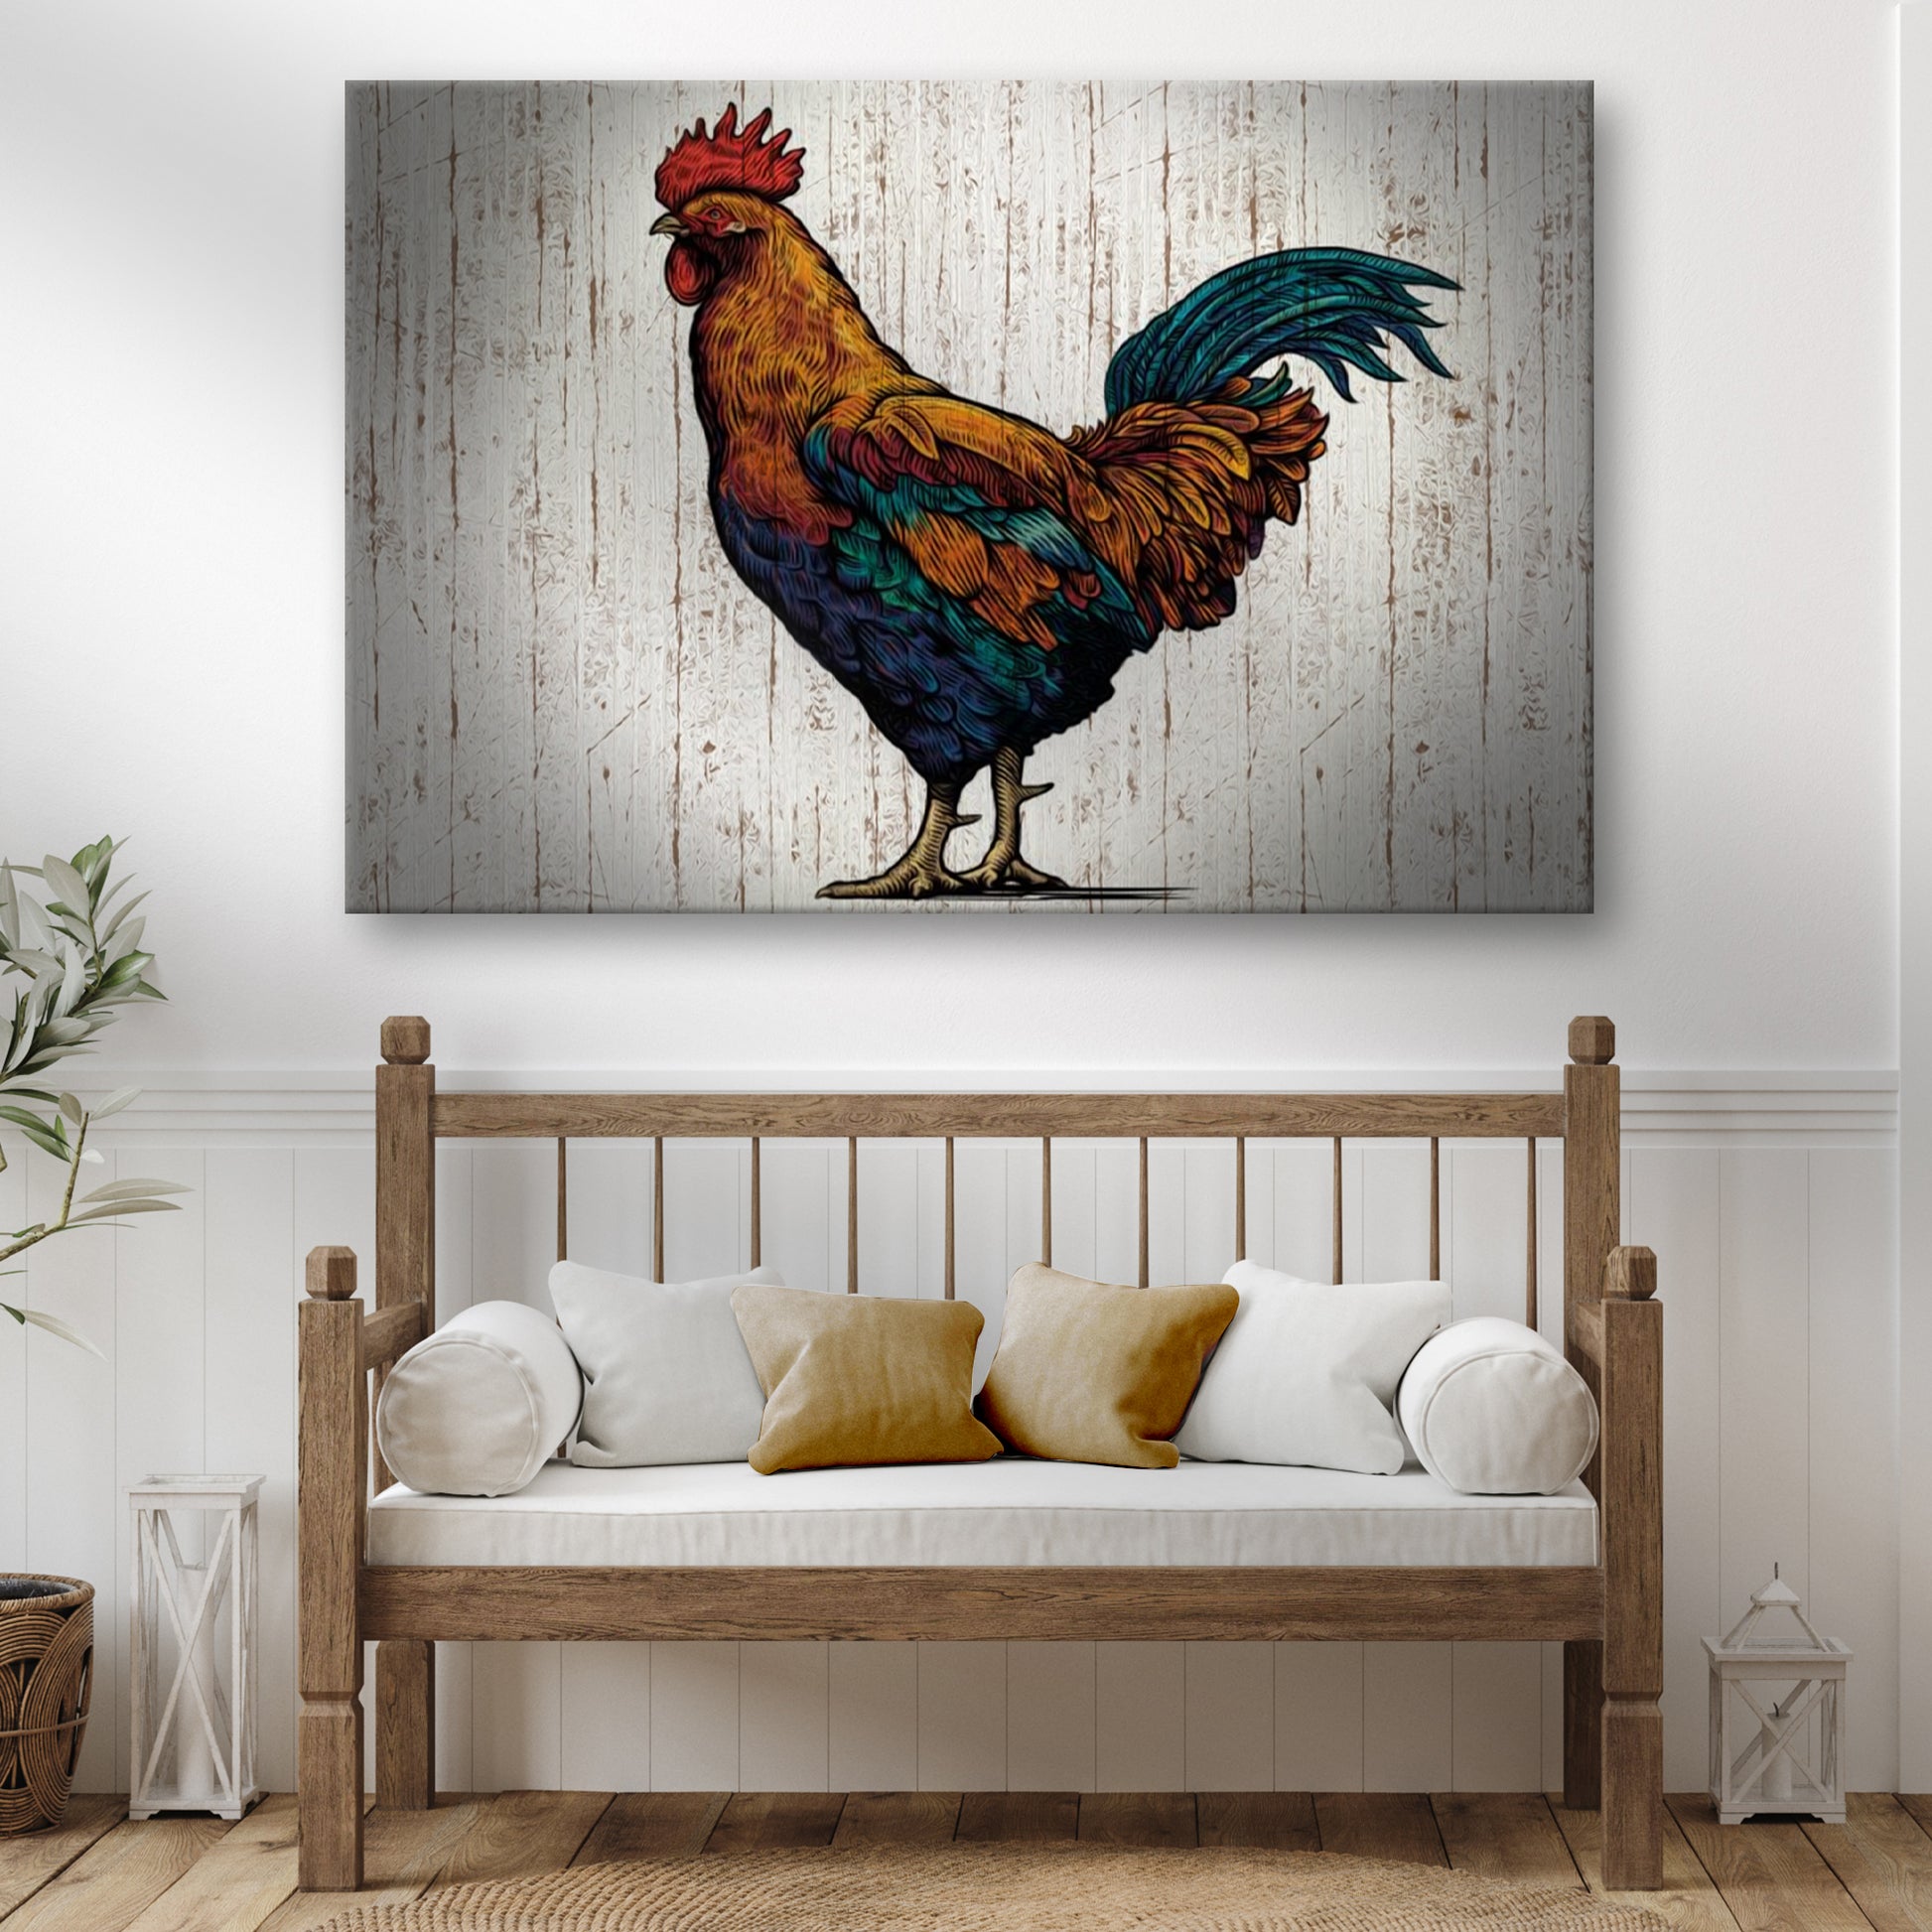 Rustic Rooster Canvas Wall Art - Image by Tailored Canvases